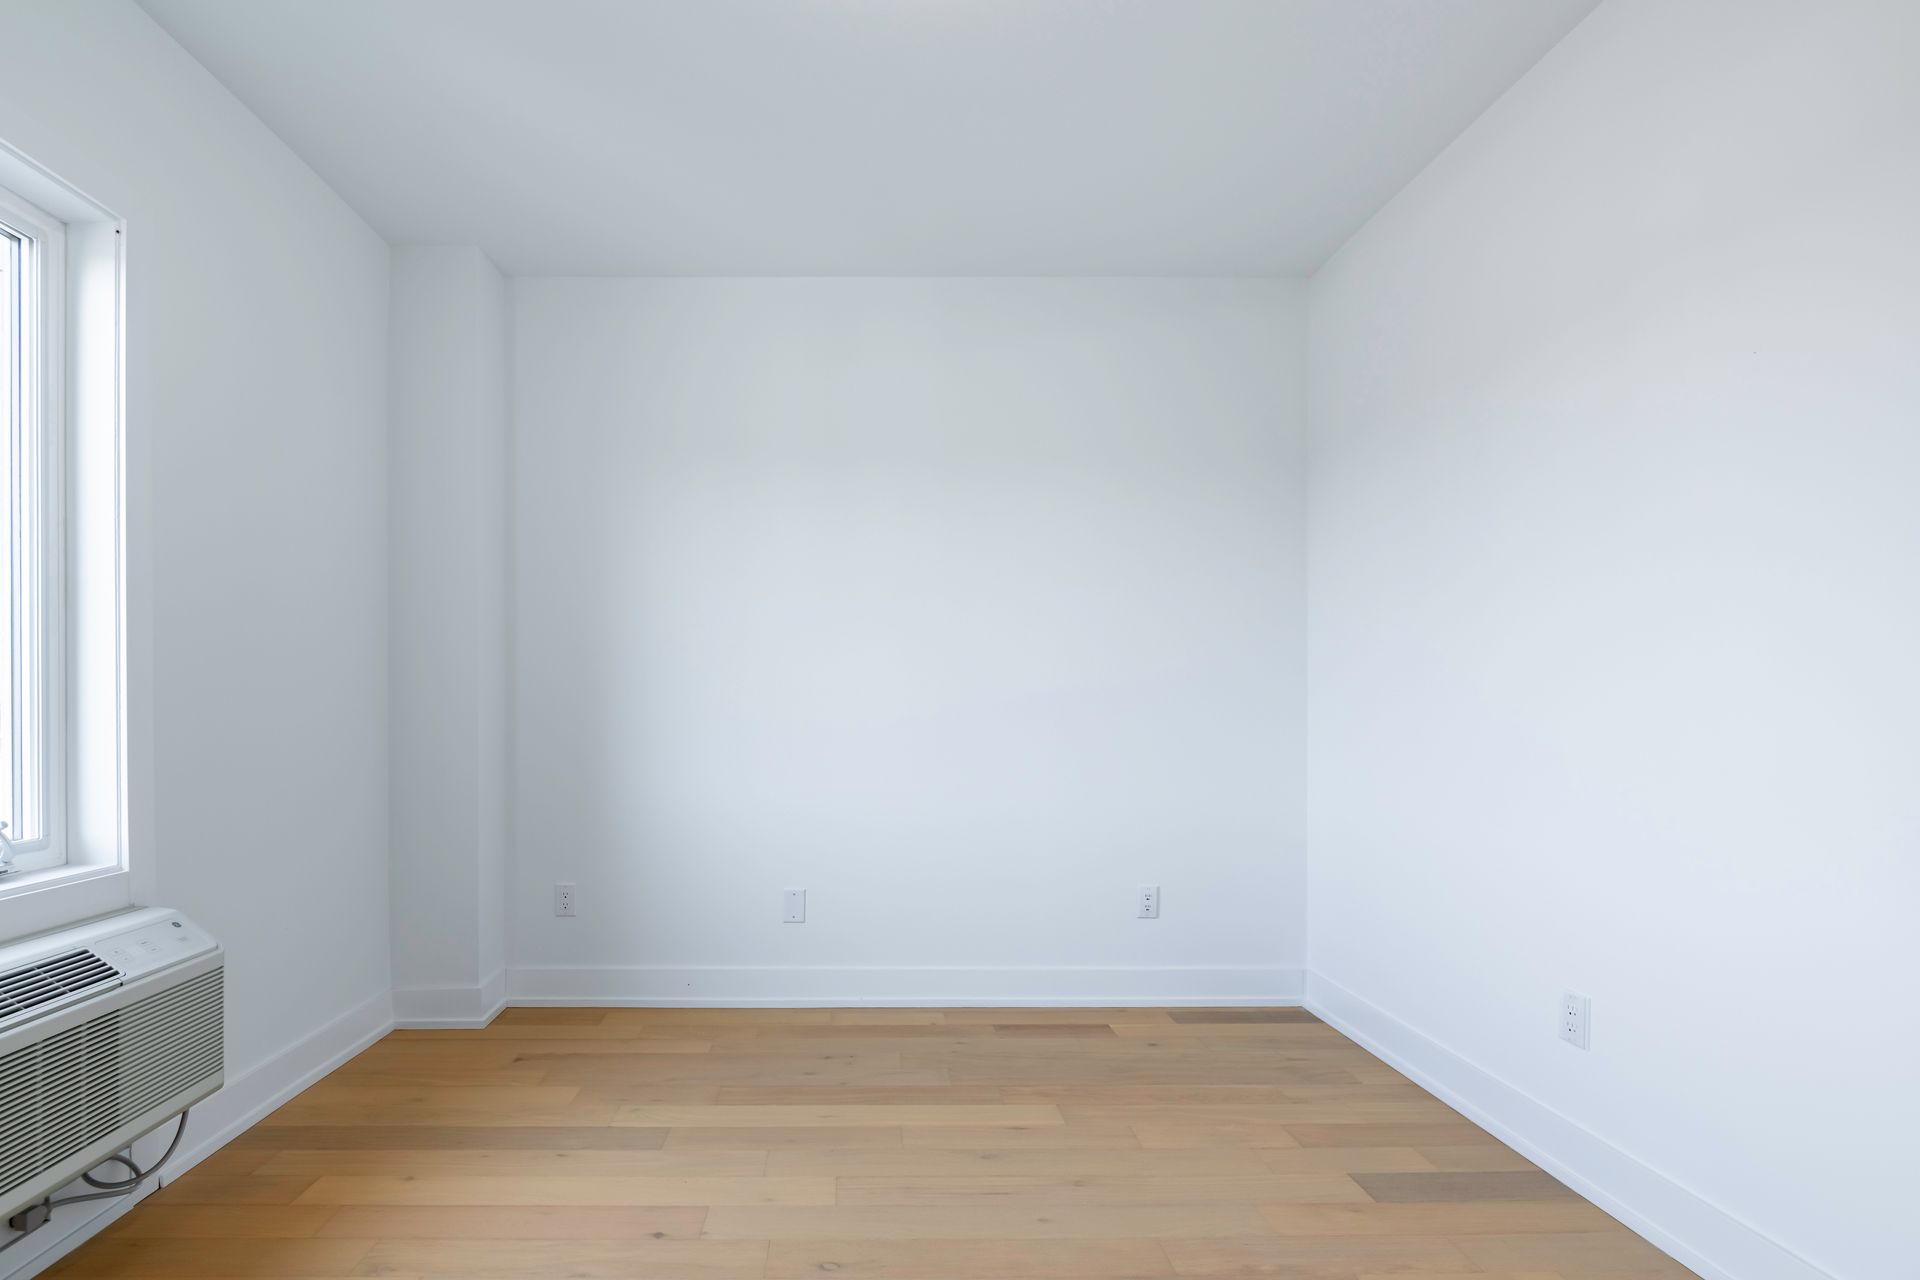 an empty room with hardwood floors , white walls and a window .